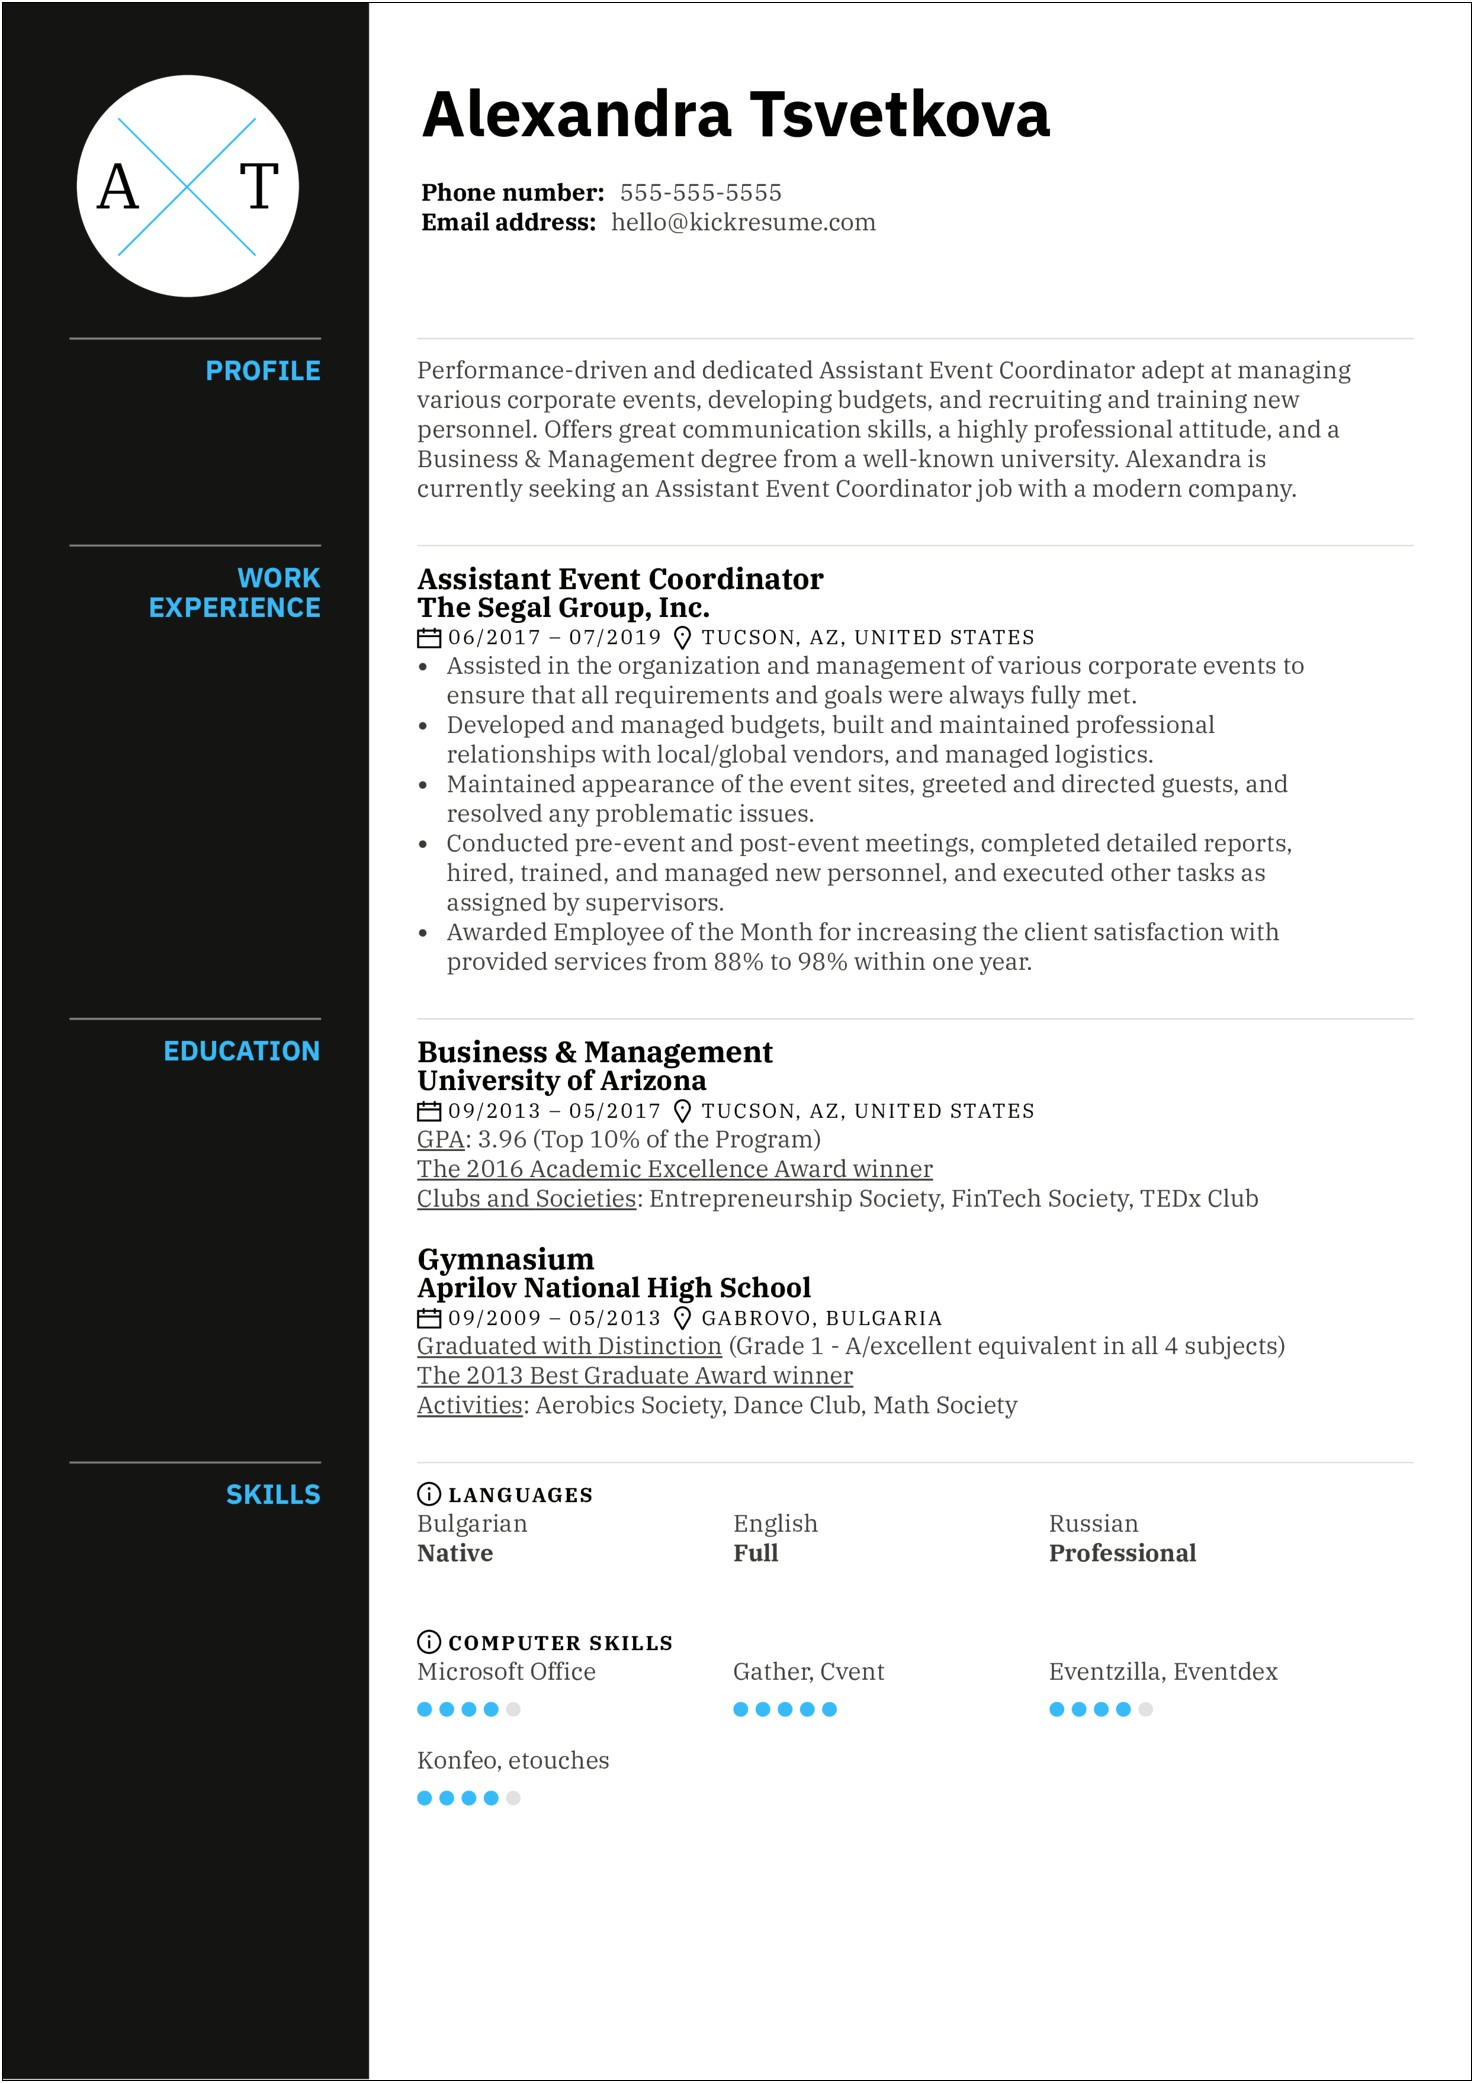 Sales Marketing And Event Manager Resume Summary